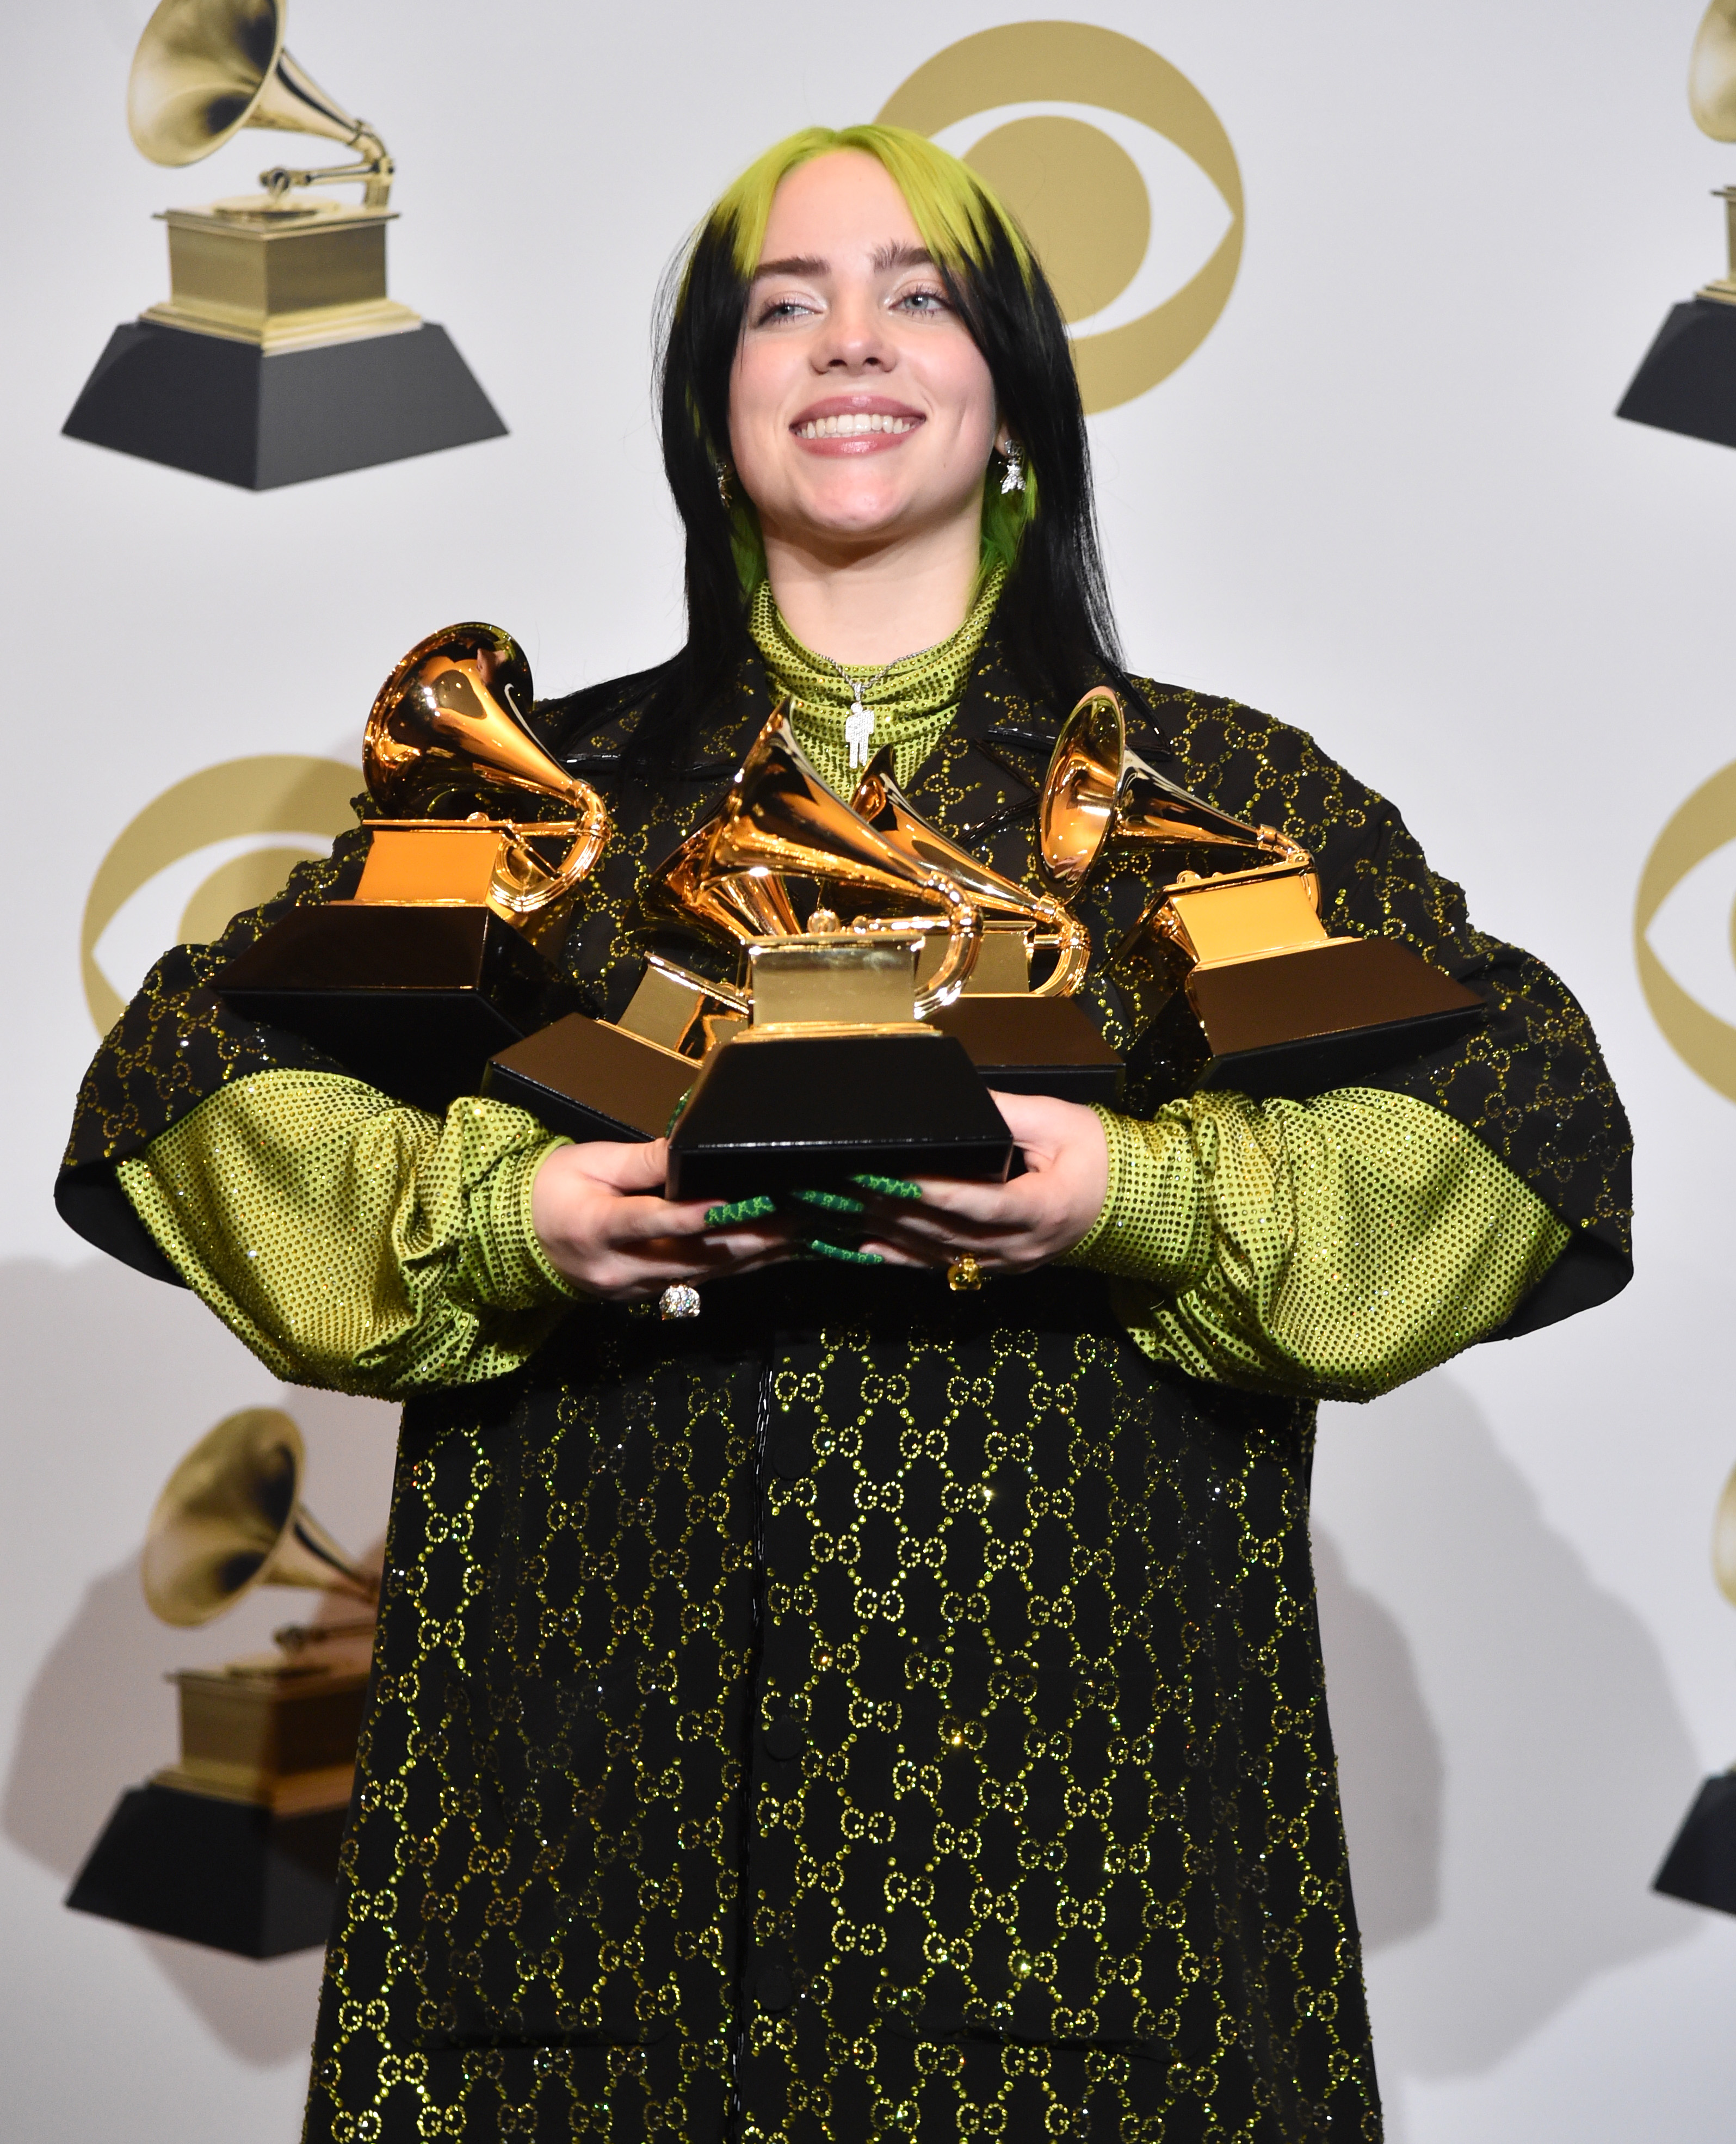 Billie Eilish, winner of Record of the Year for "Bad Guy", Album of the Year for "when we all fall asleep, where do we go?", Song of the Year for "Bad Guy", Best New Artist and Best Pop Vocal Album for "when we all fall asleep, where do we go?", poses in the press room during the 62nd Annual GRAMMY Awards at STAPLES Center on January 26, 2020 in Los Angeles, California. (Photo by Alberto E. Rodriguez/Getty Images for The Recording Academy)